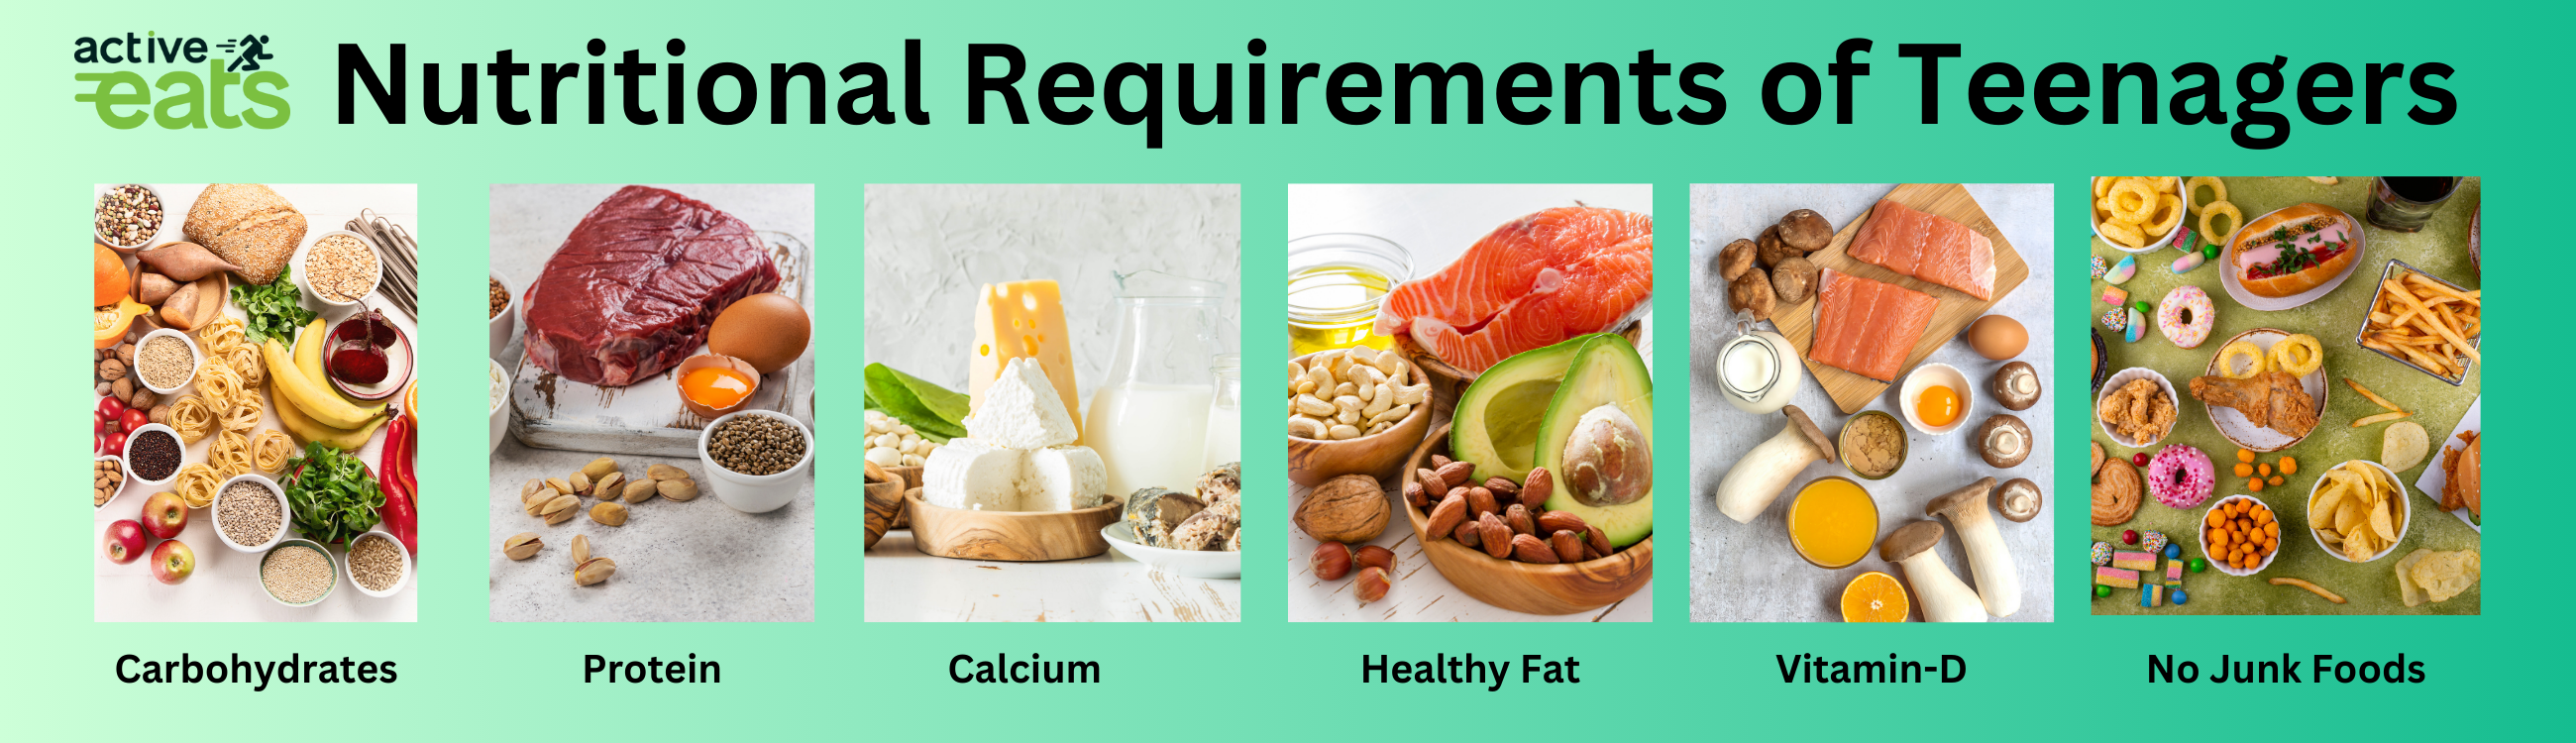 Image shows nutritional requirement for teenagers. It includes: 1. calcium rich food sources, 2. Vitamin D rich food items 3. Healthy carbohydrates like pulses, whole grains 4. Eating healthy fat rich food items like avocado, nuts, lean meat 5. Protein rich food items like egg, fish and nuts 6. Eating no junk foods and processed food items like cold drink, donuts, fried food etc